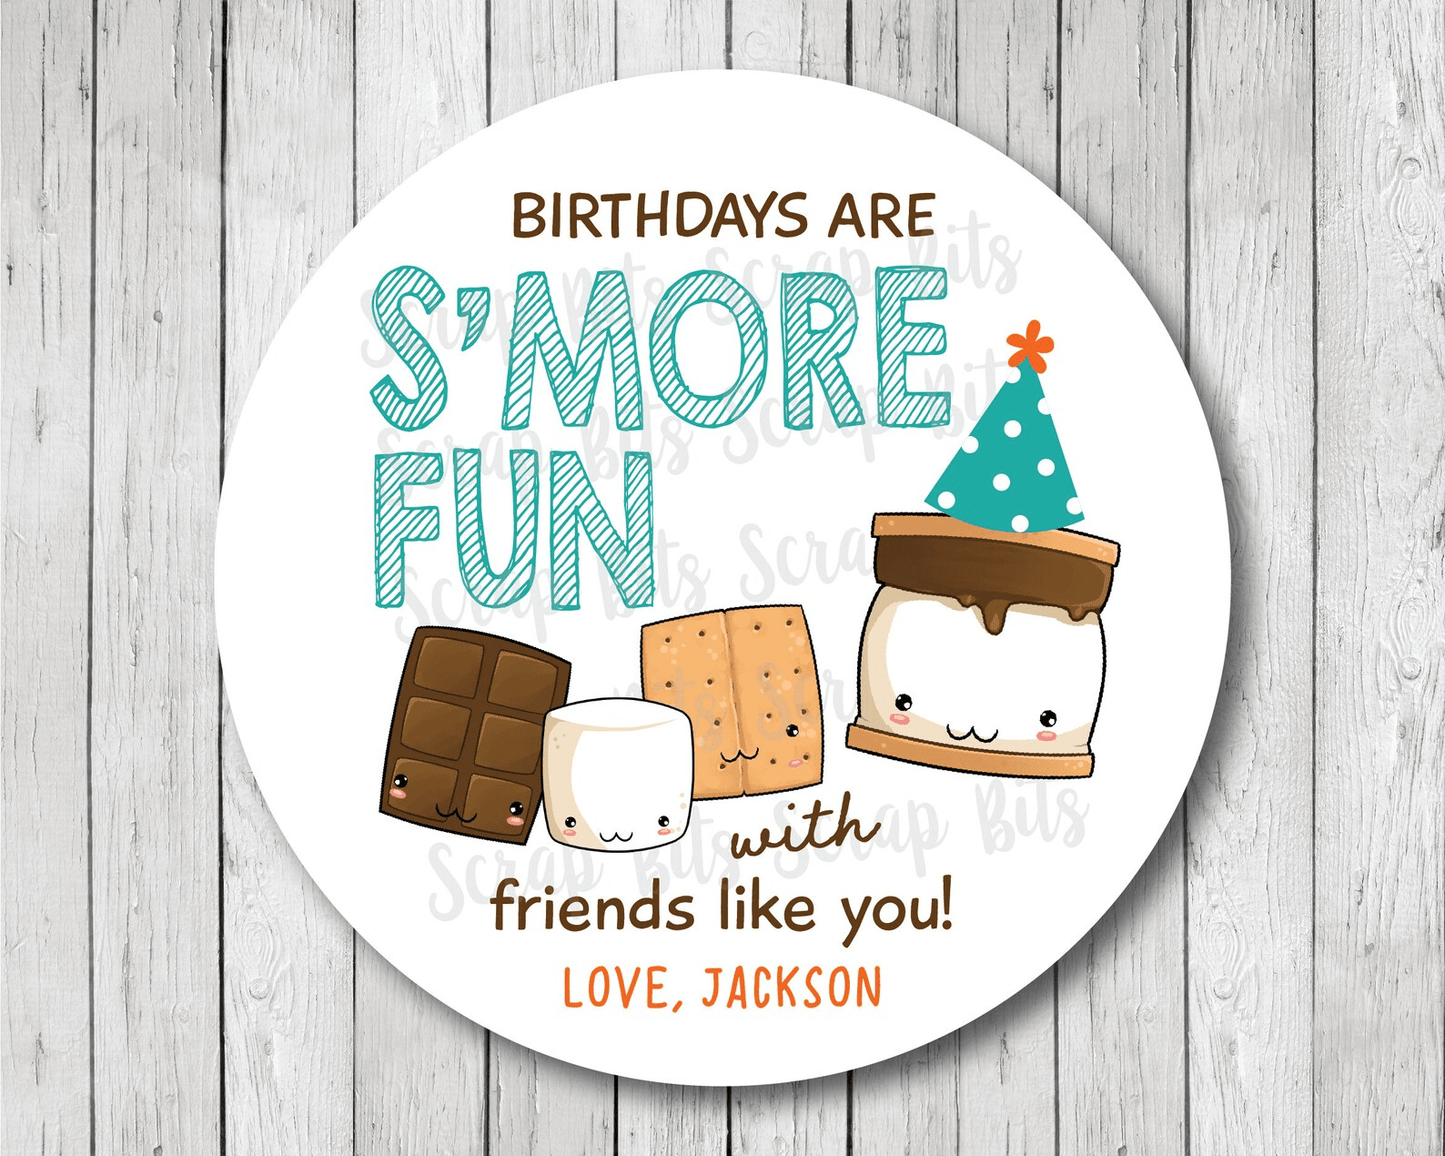 Birthdays Are S'more Fun, Smore Birthday Favor Stickers or Tags - Scrap Bits